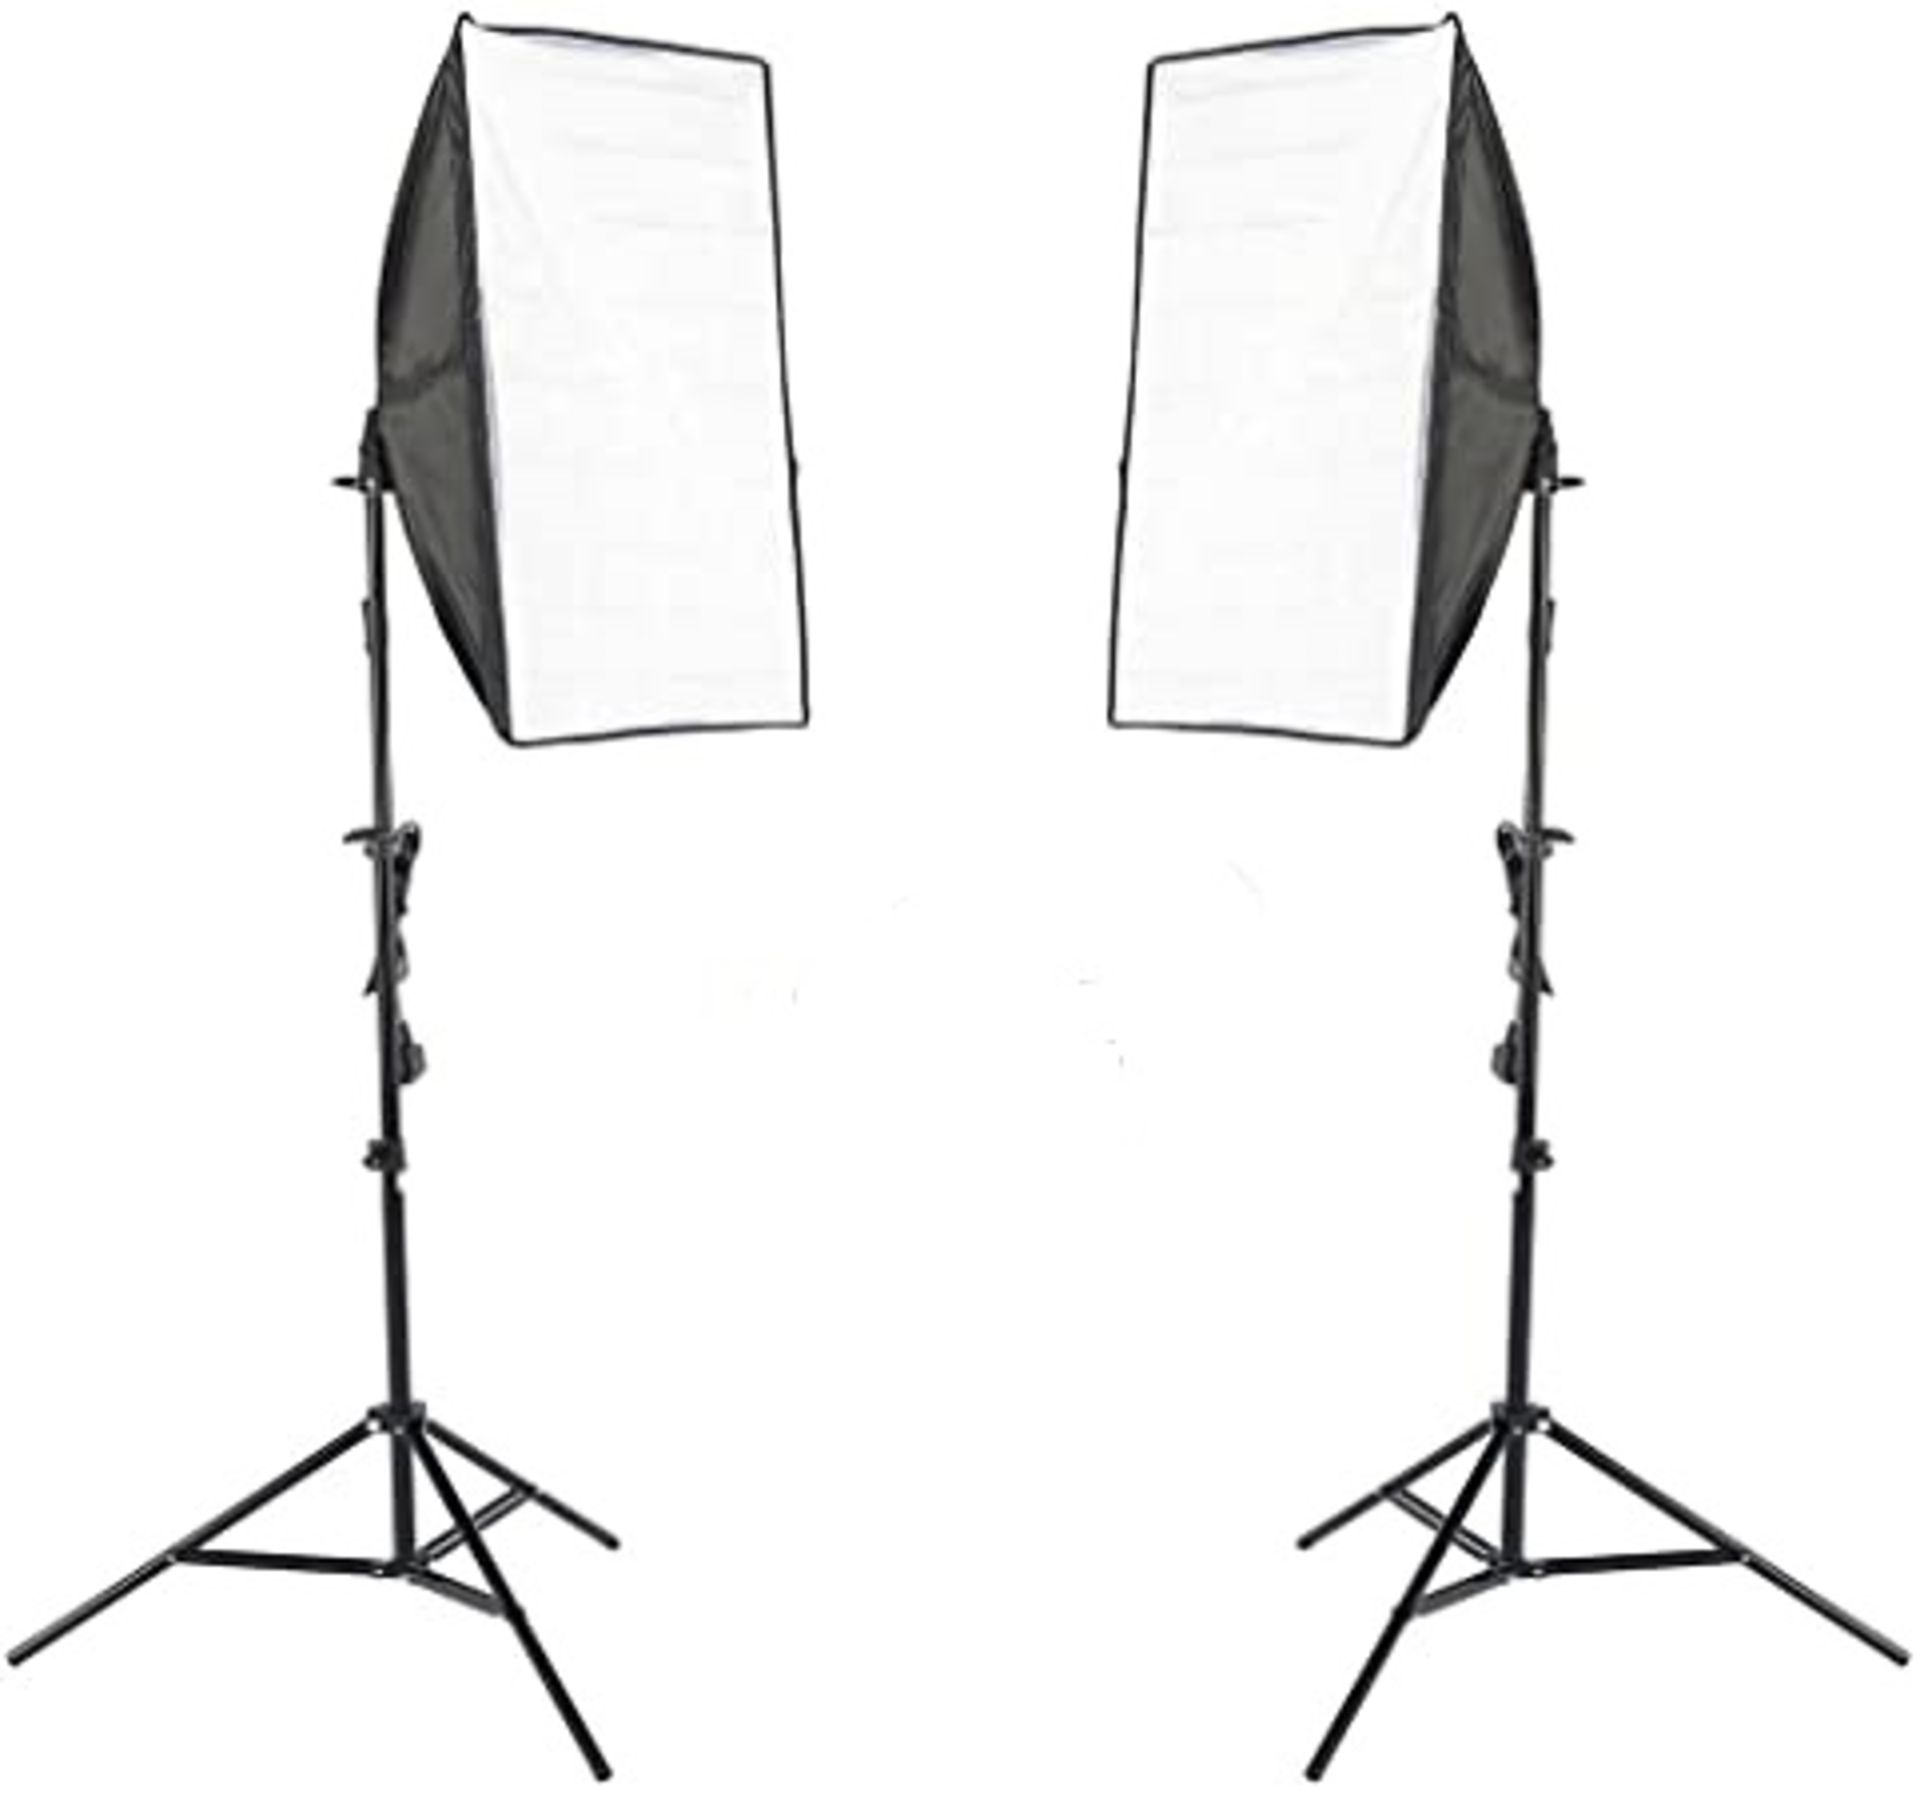 Pair of Photography Studio Continuous Lighting Softbox Light Kit With Stand